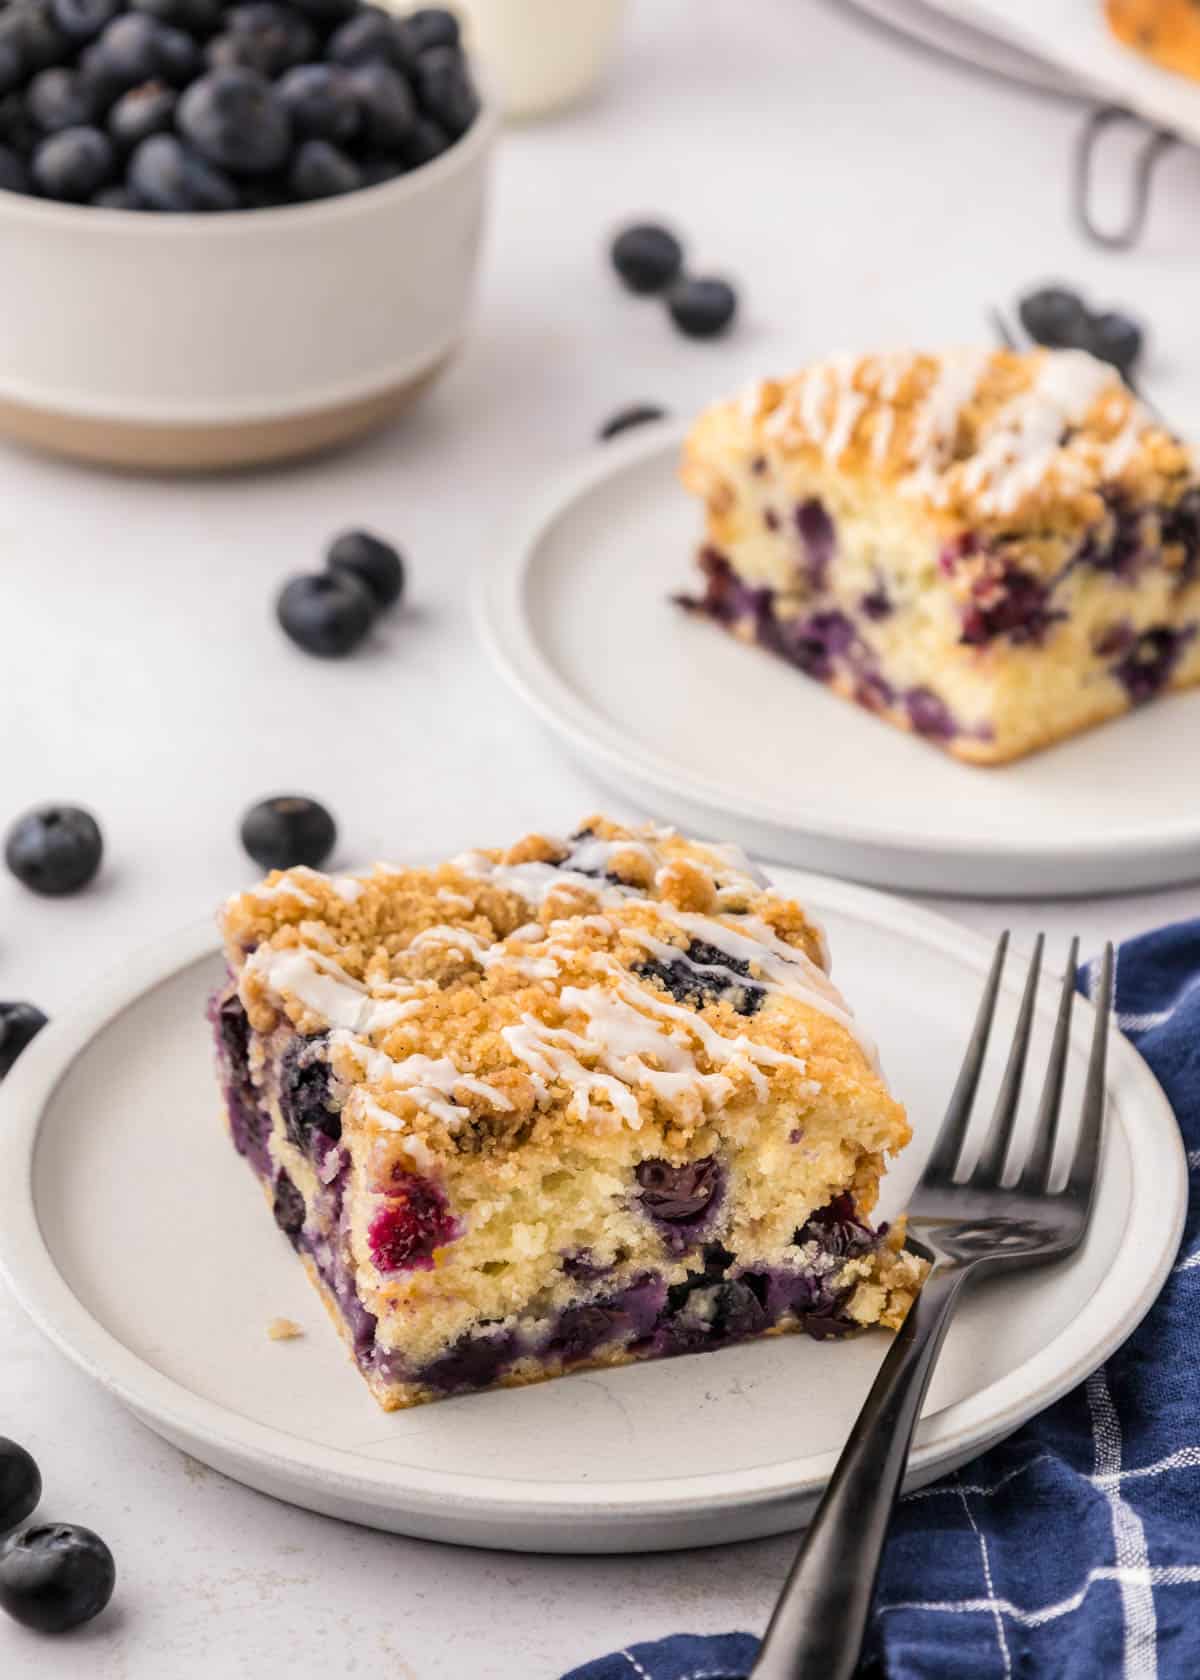 A slice of blueberry coffee cake on a plate with a fork.